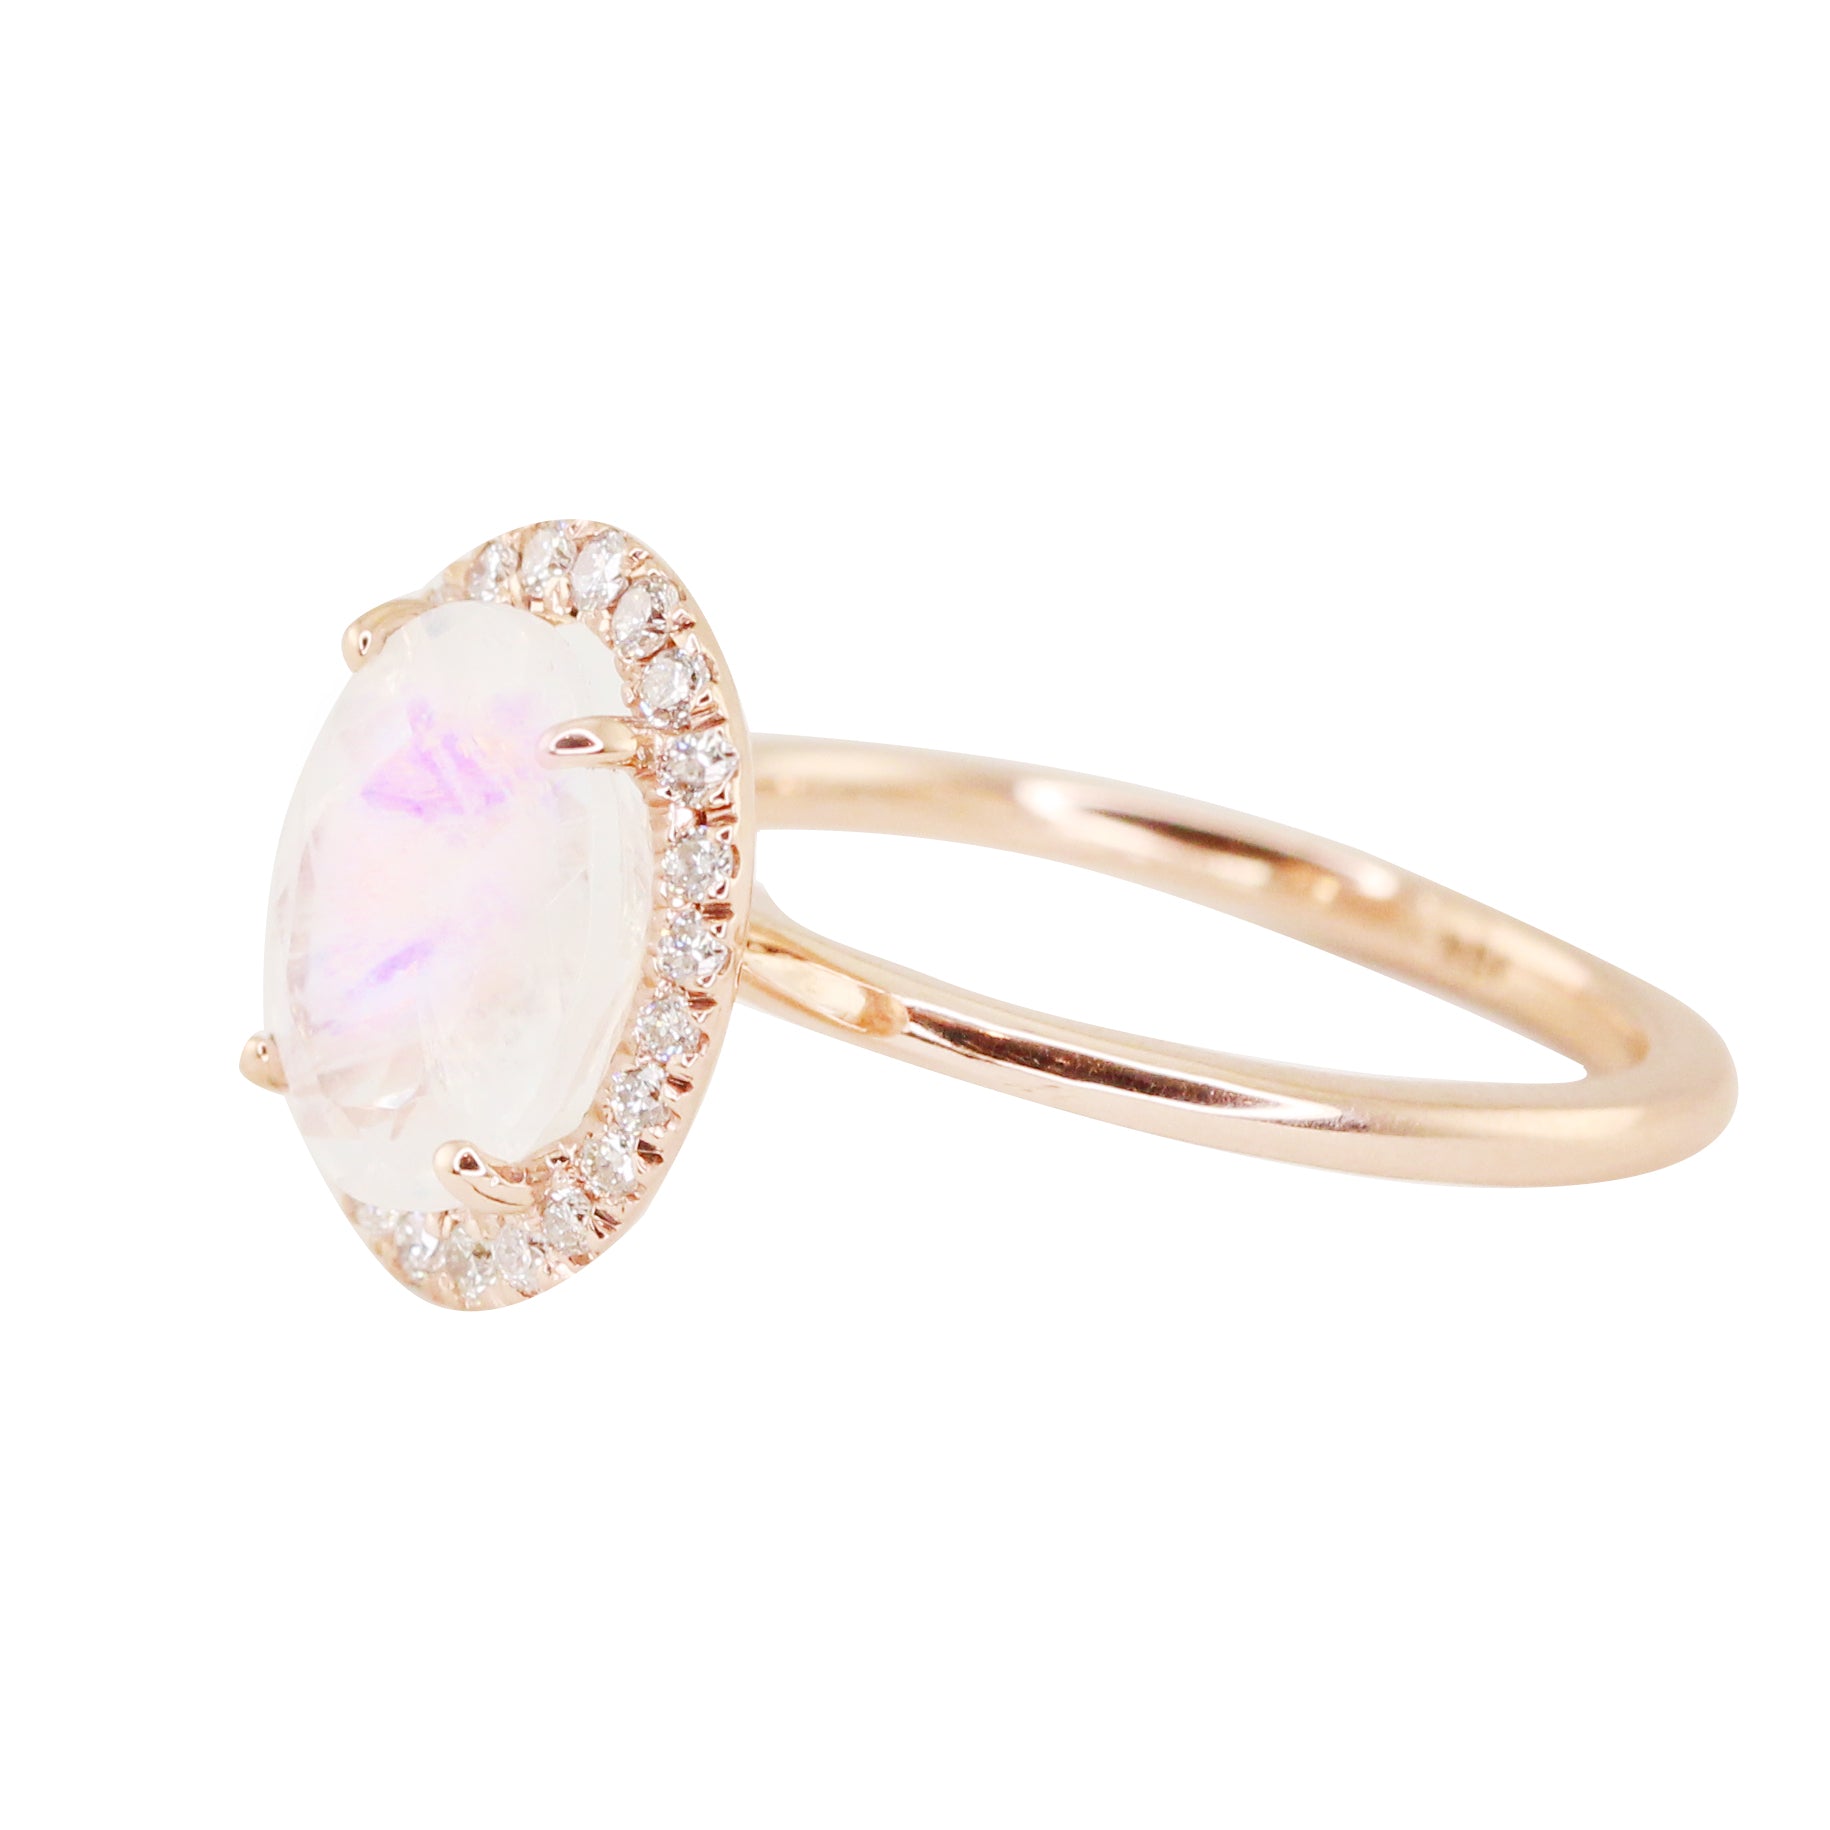 14kt gold and diamond solitaire moonstone ring with halo - Luna Skye